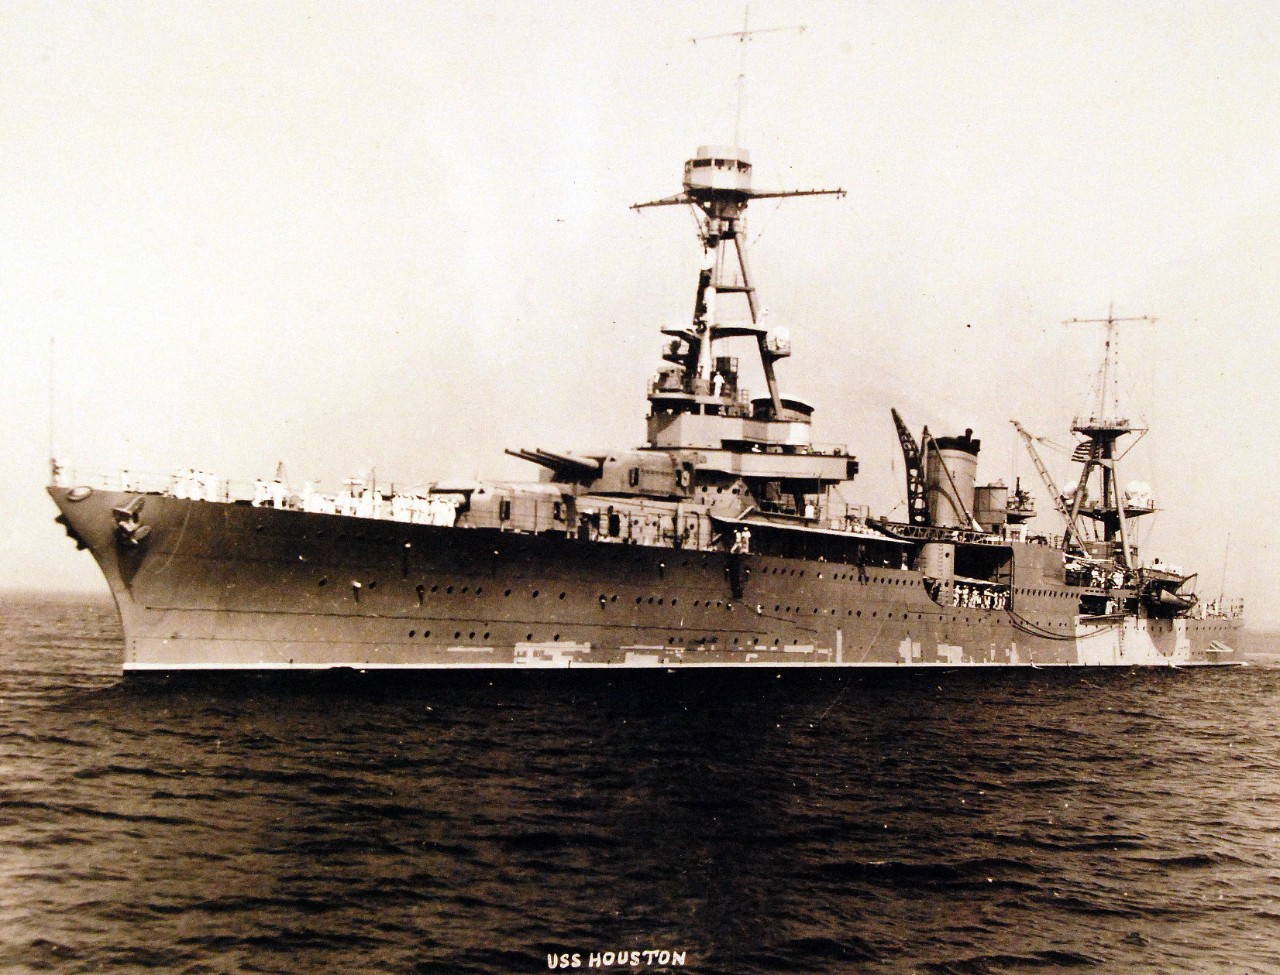 <p>19-N-13424: USS Houston (CA 30), port view while at anchor during an inspection on deck. Undated and unknown location. U.S. Bureau of Ships Photograph, now in the collections of the National Archives. (2015/2/3).</p>
